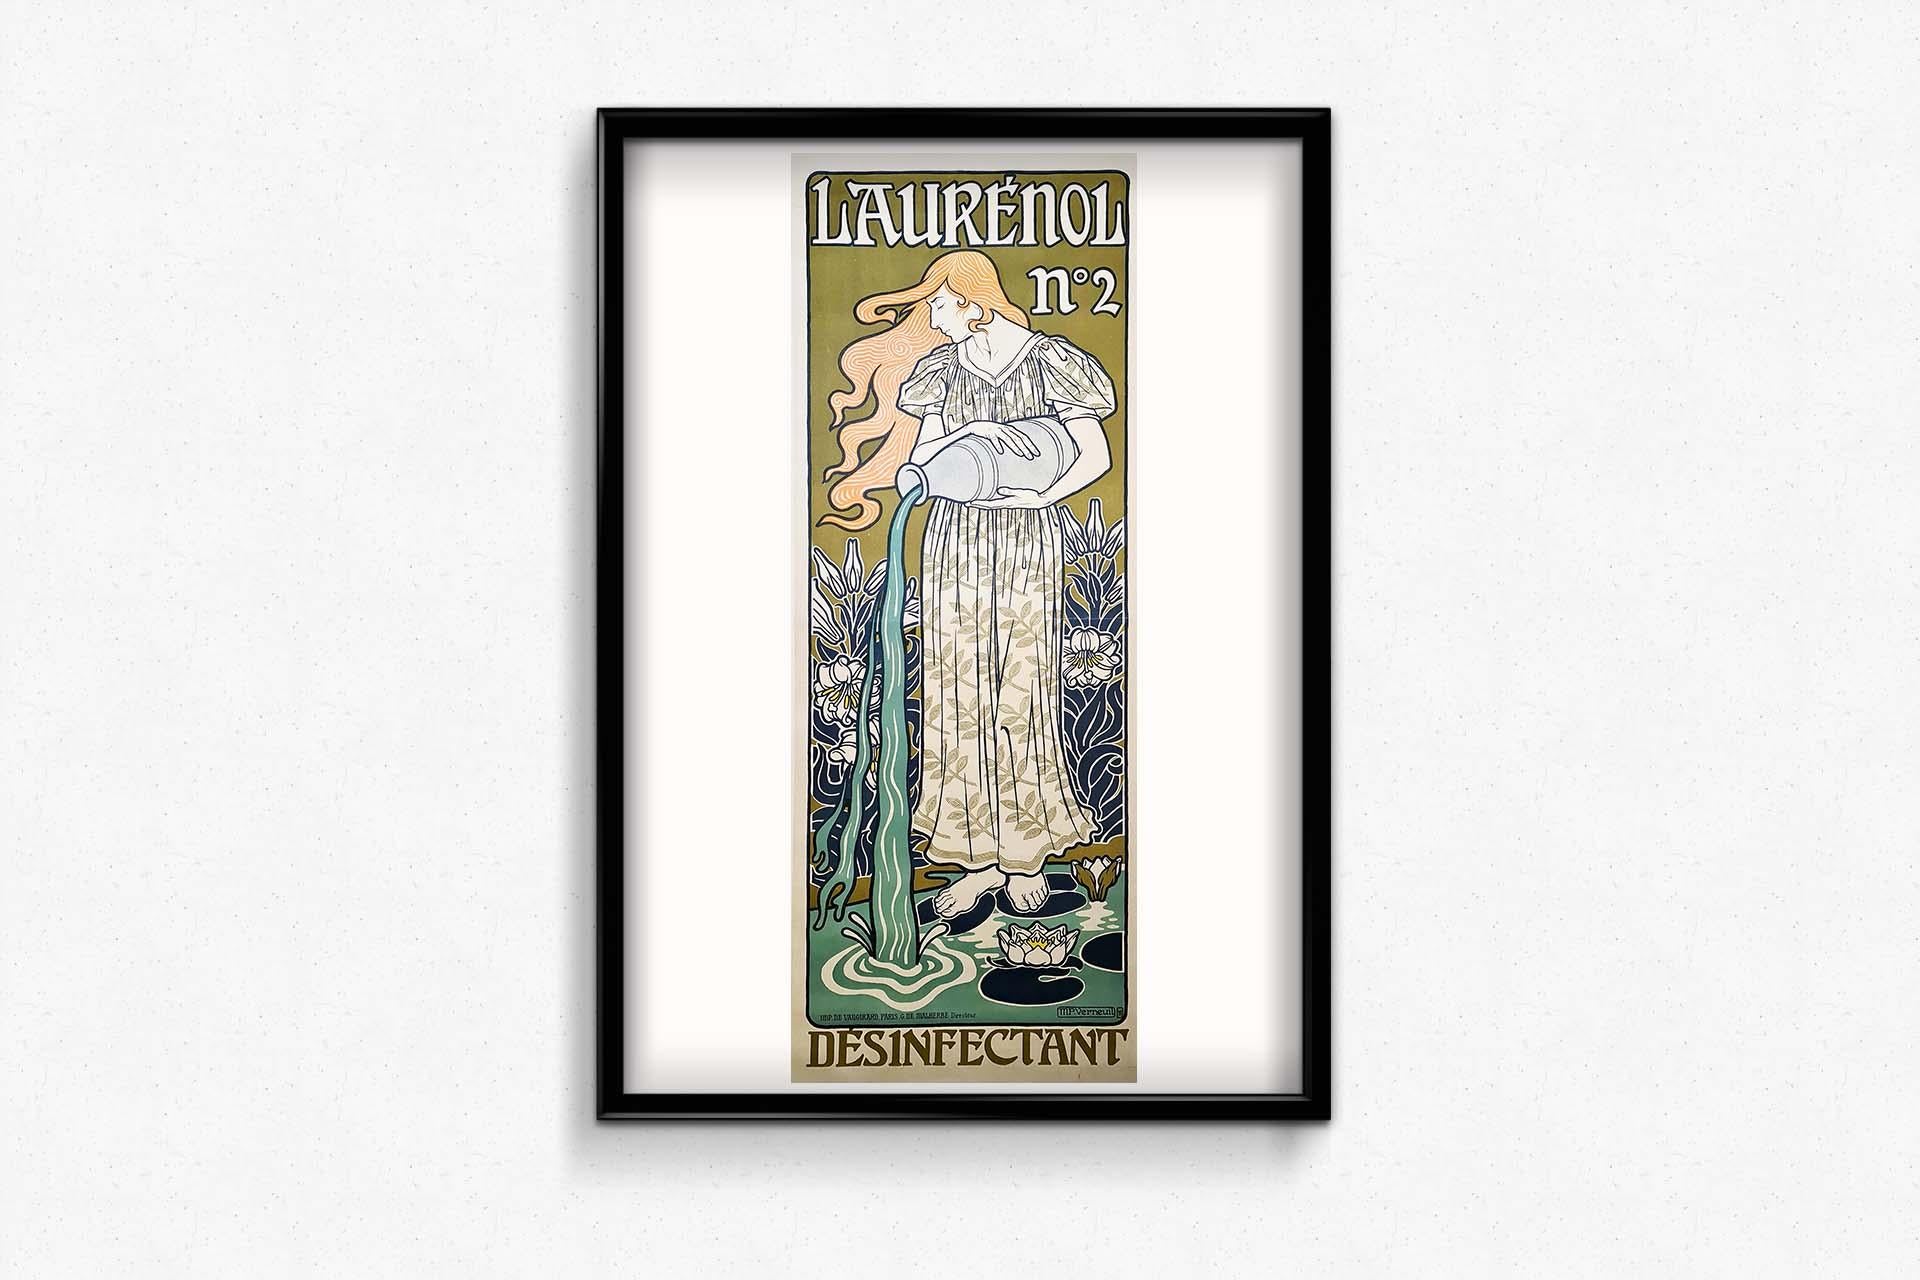 Very nice original poster from 1898 by Maurice Pillard Verneuil.
Standing on dark blue water lilies, a pretty woman with flowing orange hair pours water from a gray jug. The essence of nature, purity and freshness in this ad for a disinfectant is